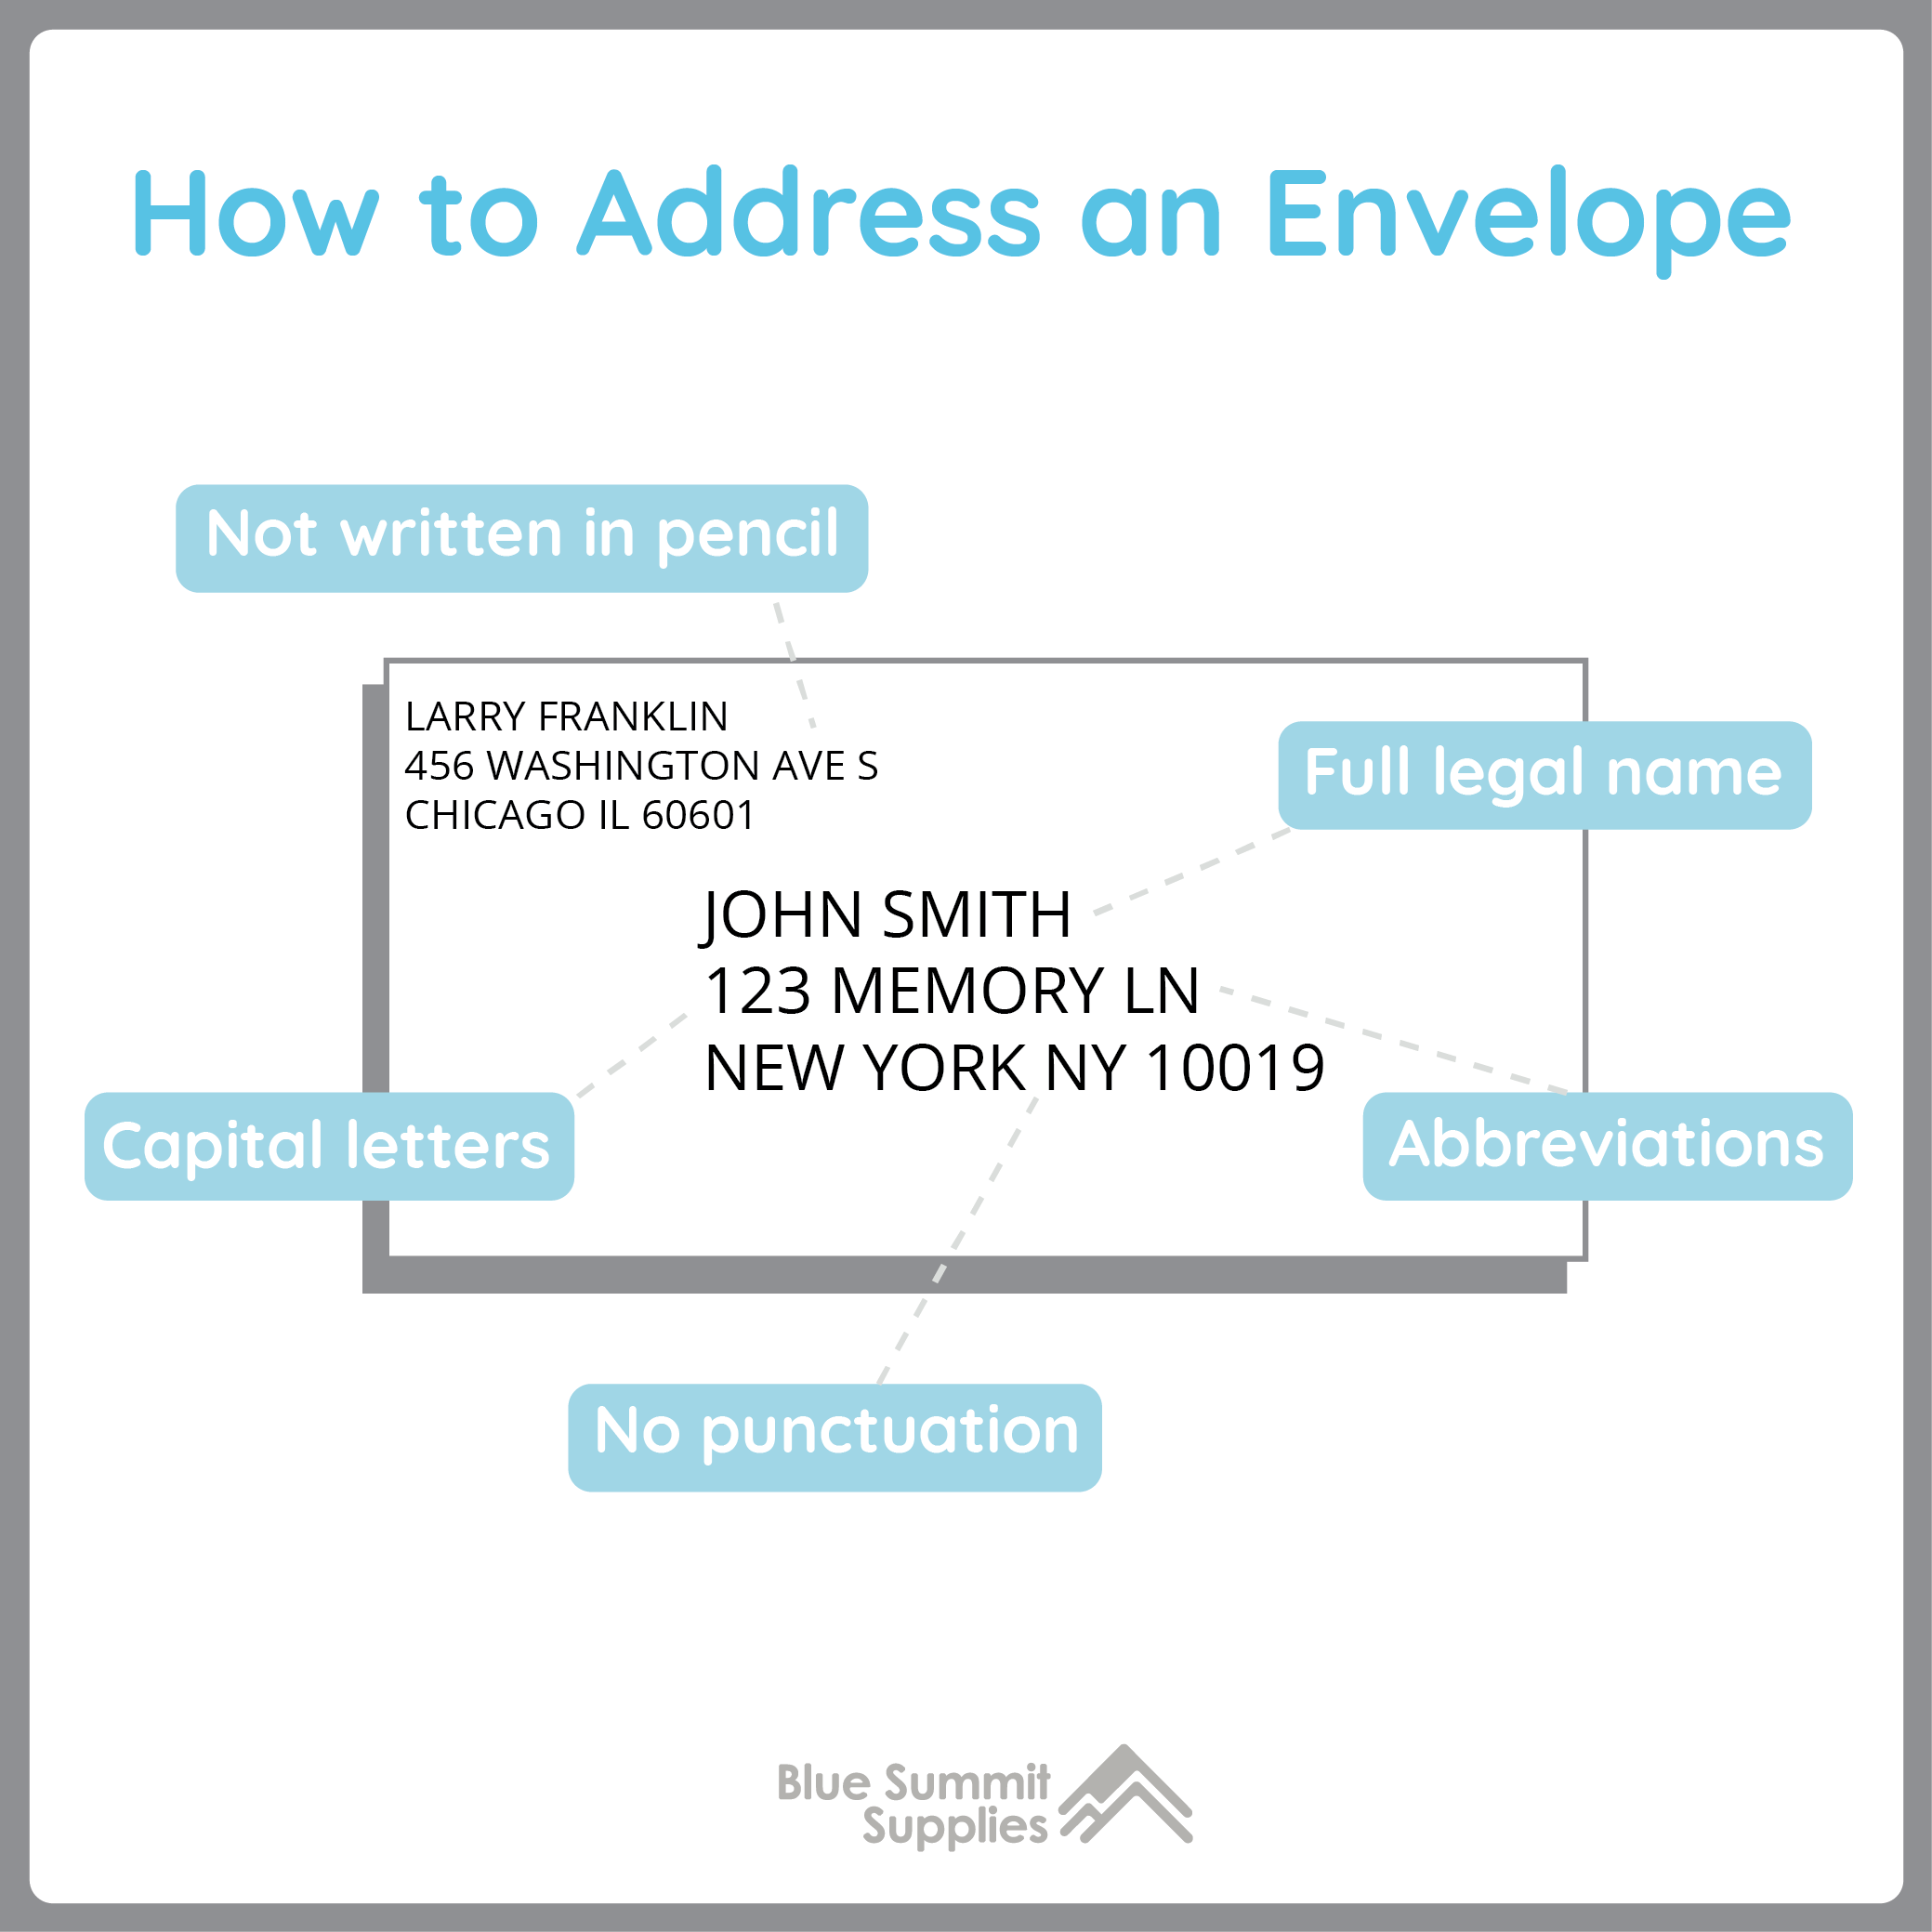 How to address an envelope: Do's and Don'ts